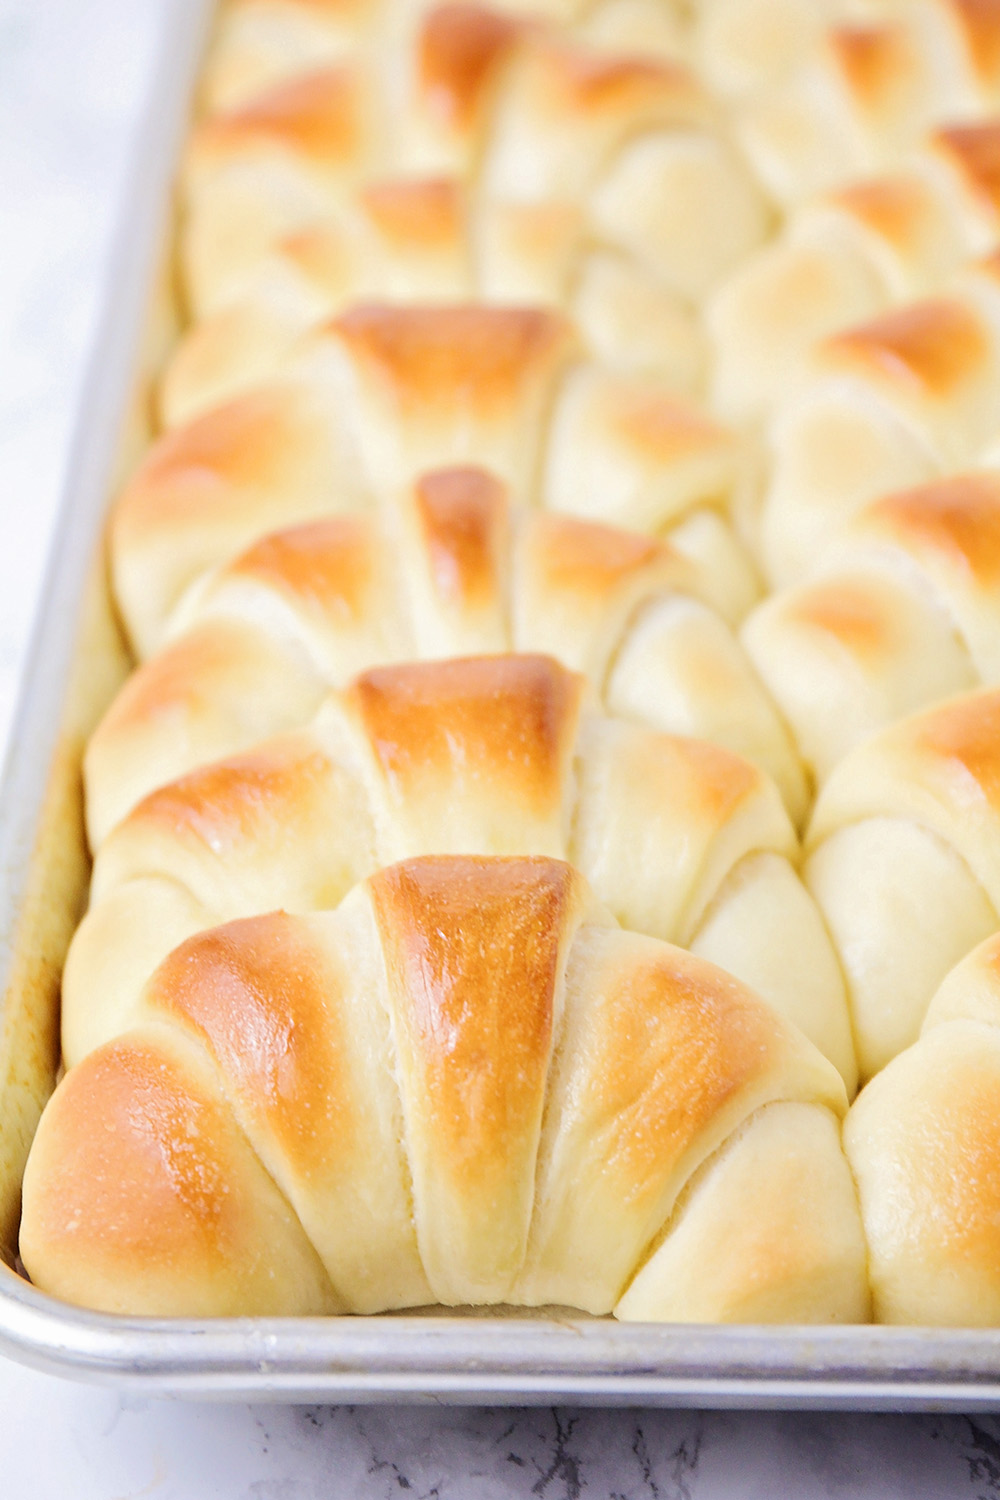 These delicious crescent rolls turn out perfect every single time, and are so easy to make!